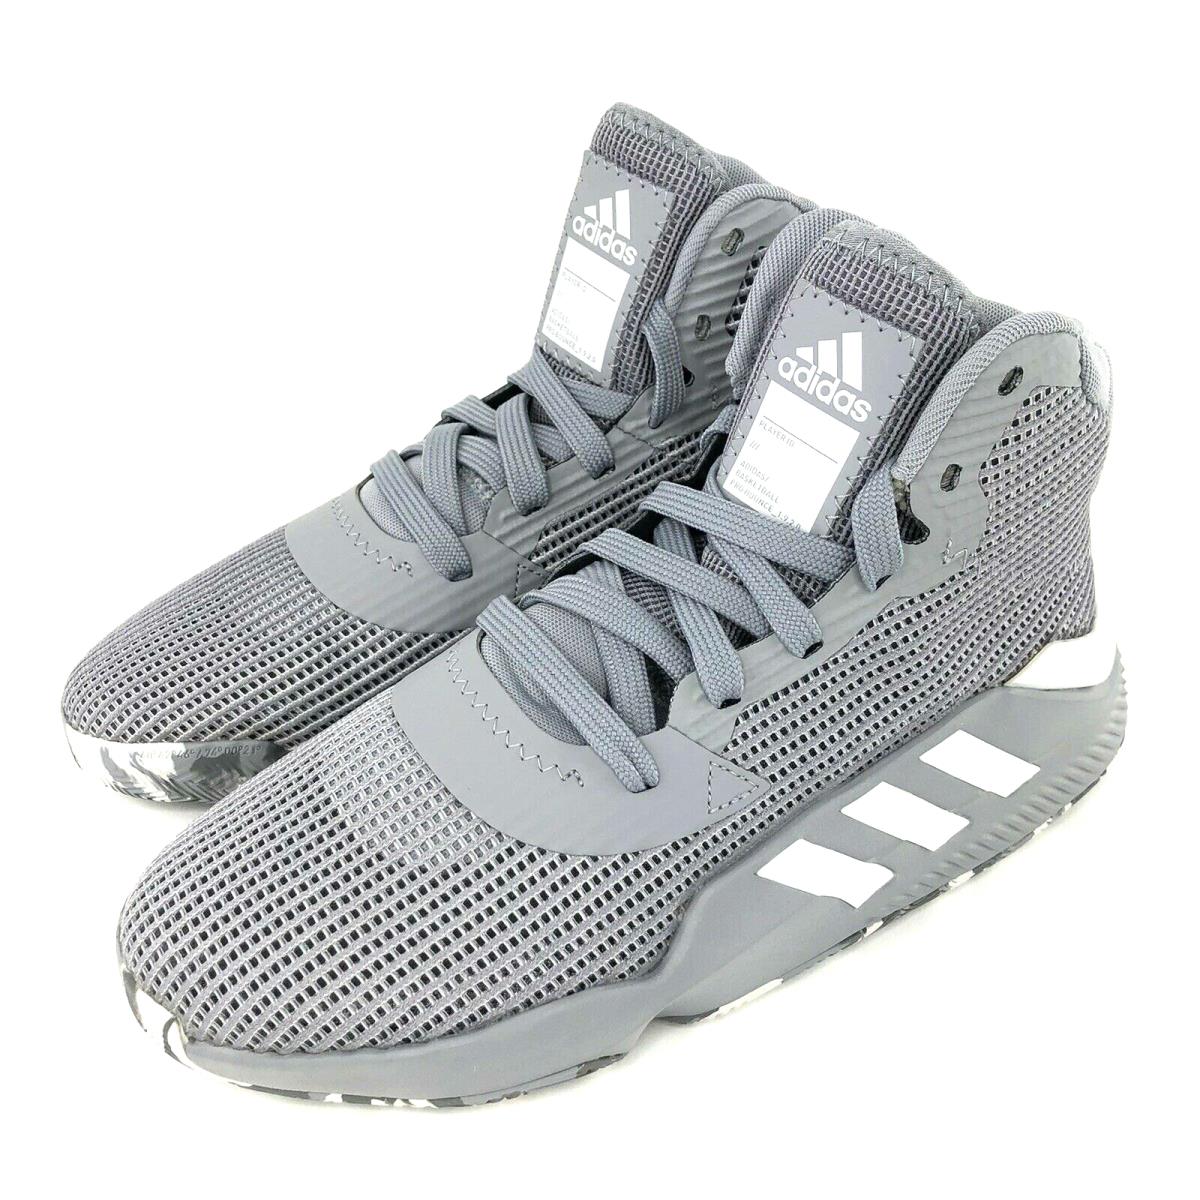 Adidas Pro Bounce 2019 Mens 6.5 Grey Basketball Sneakers Shoes